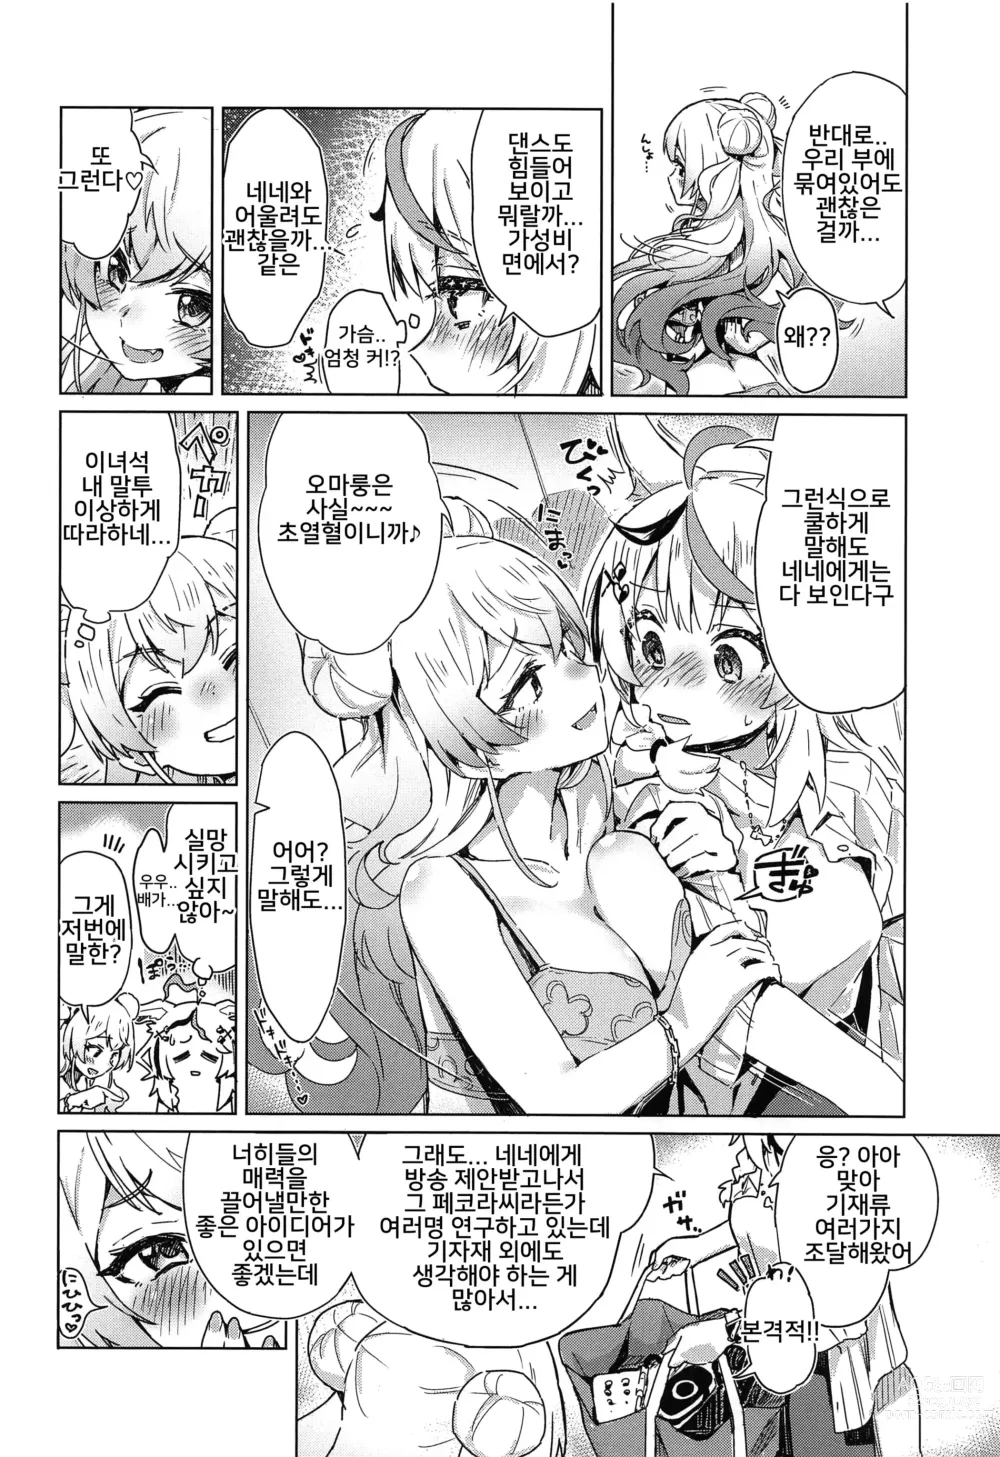 Page 7 of doujinshi Fennec wa Iseijin no Yume o Miru ka - Does The Fennec Dream of The Lovely Visitor?